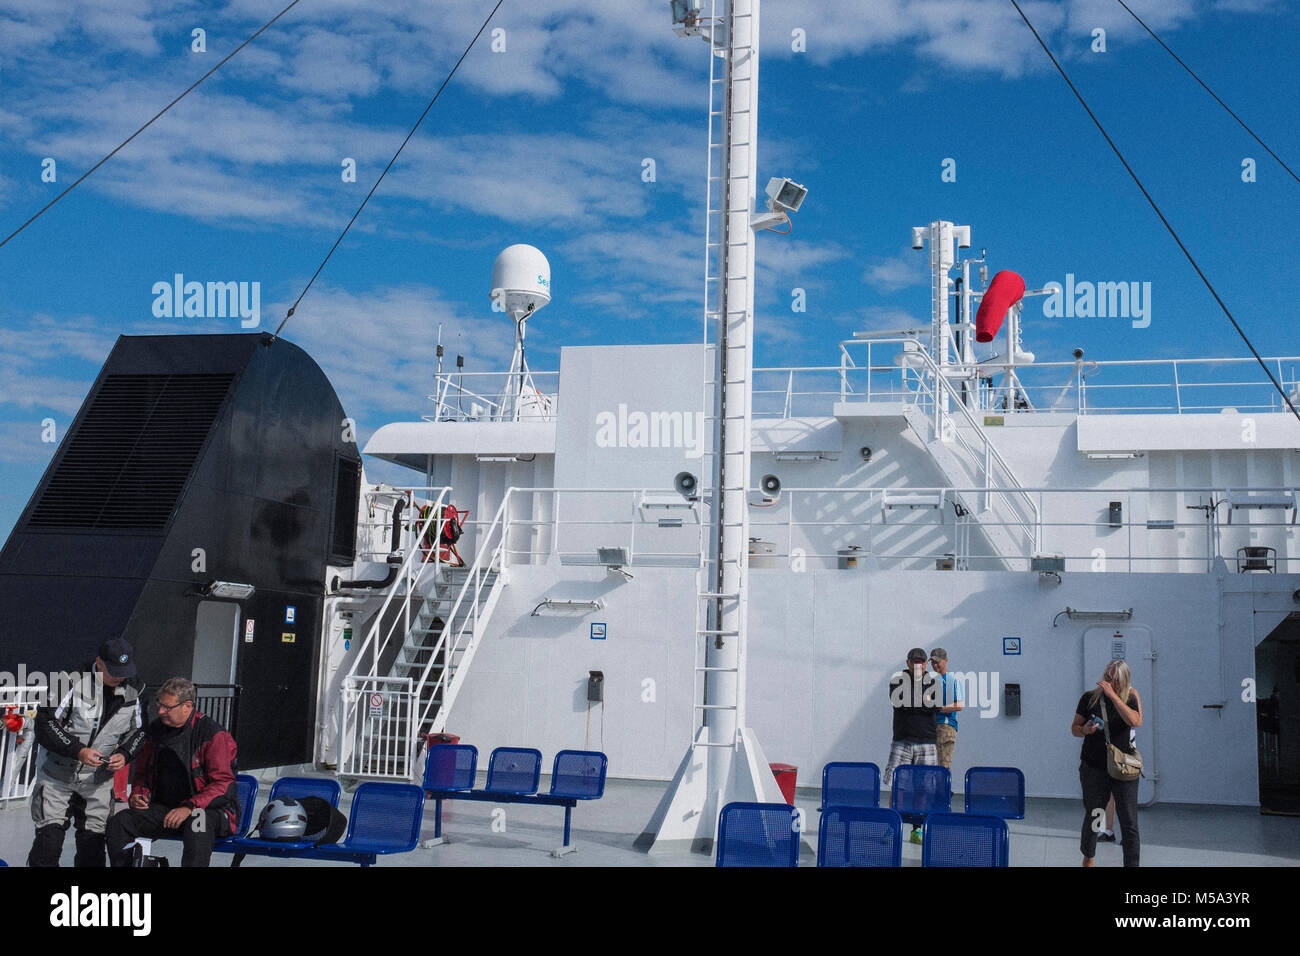 Norway, Ferry from Bognes to Lodingen Stock Photo - Alamy